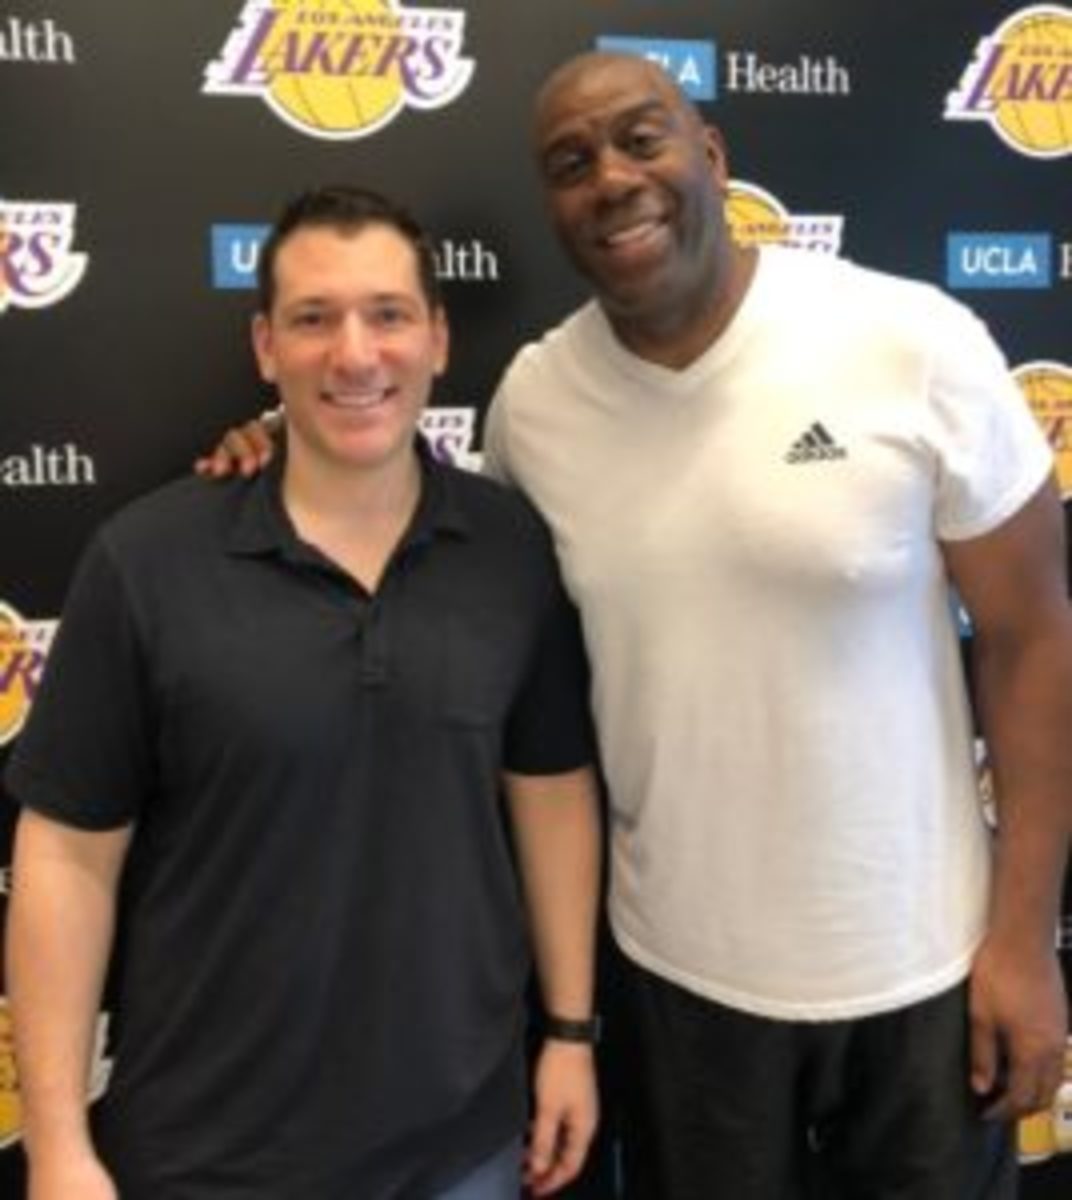  Press Pass Collectibles President Kyle Bell (left) with Magic Johnson (right). (Photo courtesy Press Pass Collectibles)